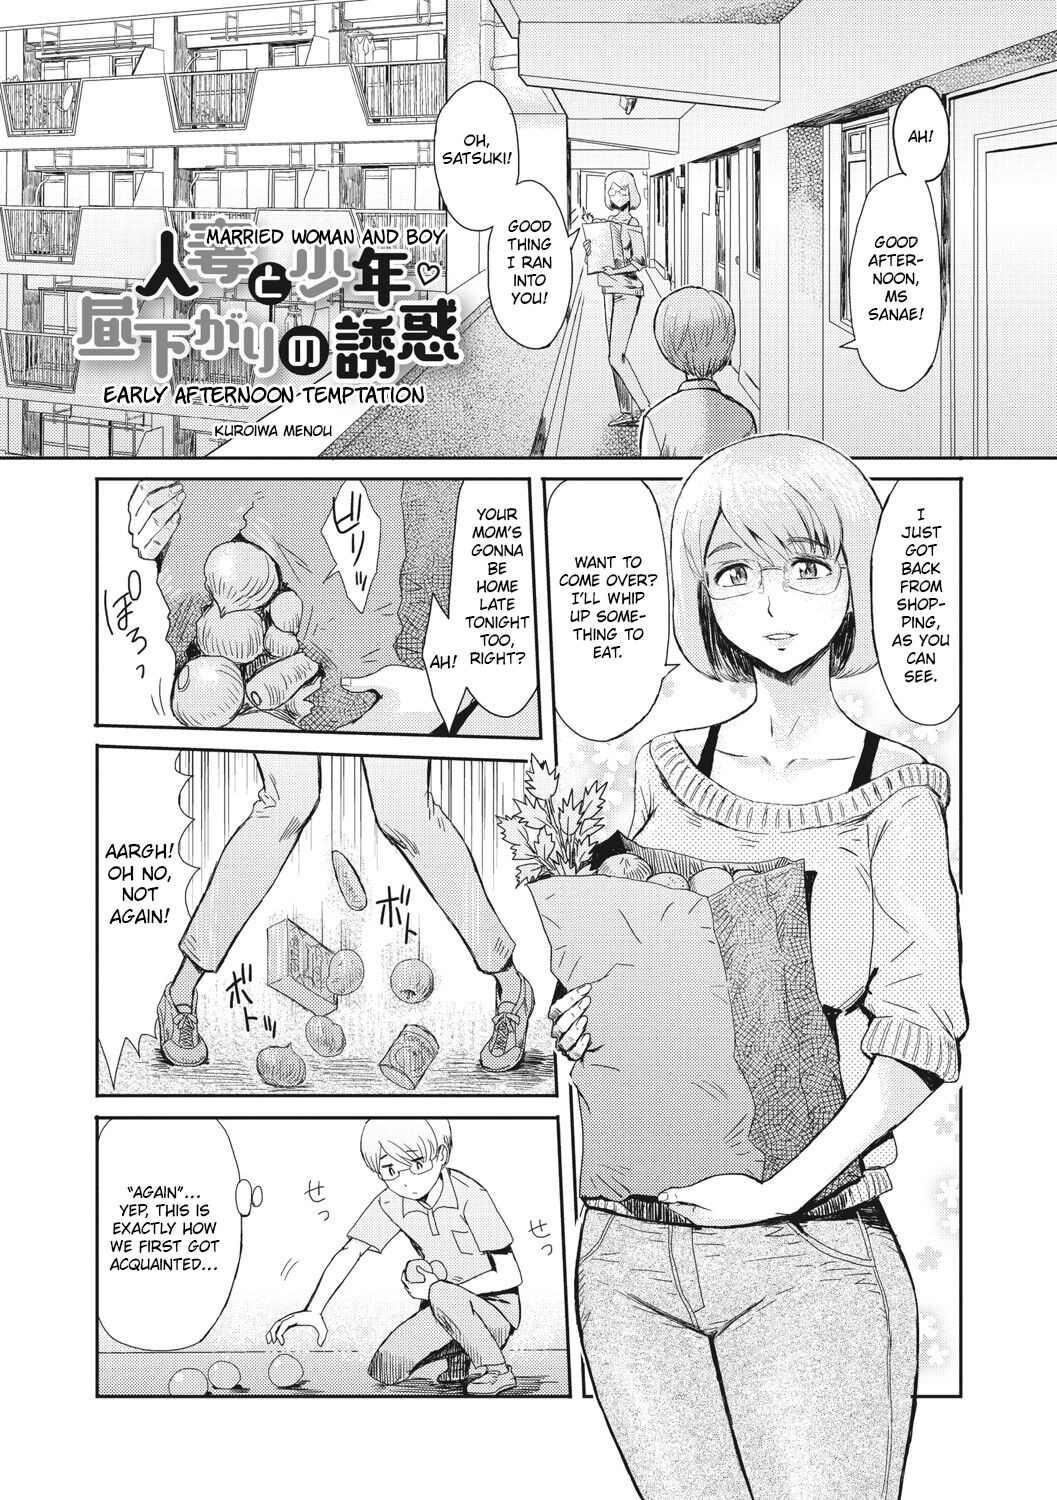 Married Woman and Boy Early Afternoon Temptation Kuroiwa Menou Porn Comic pic photo